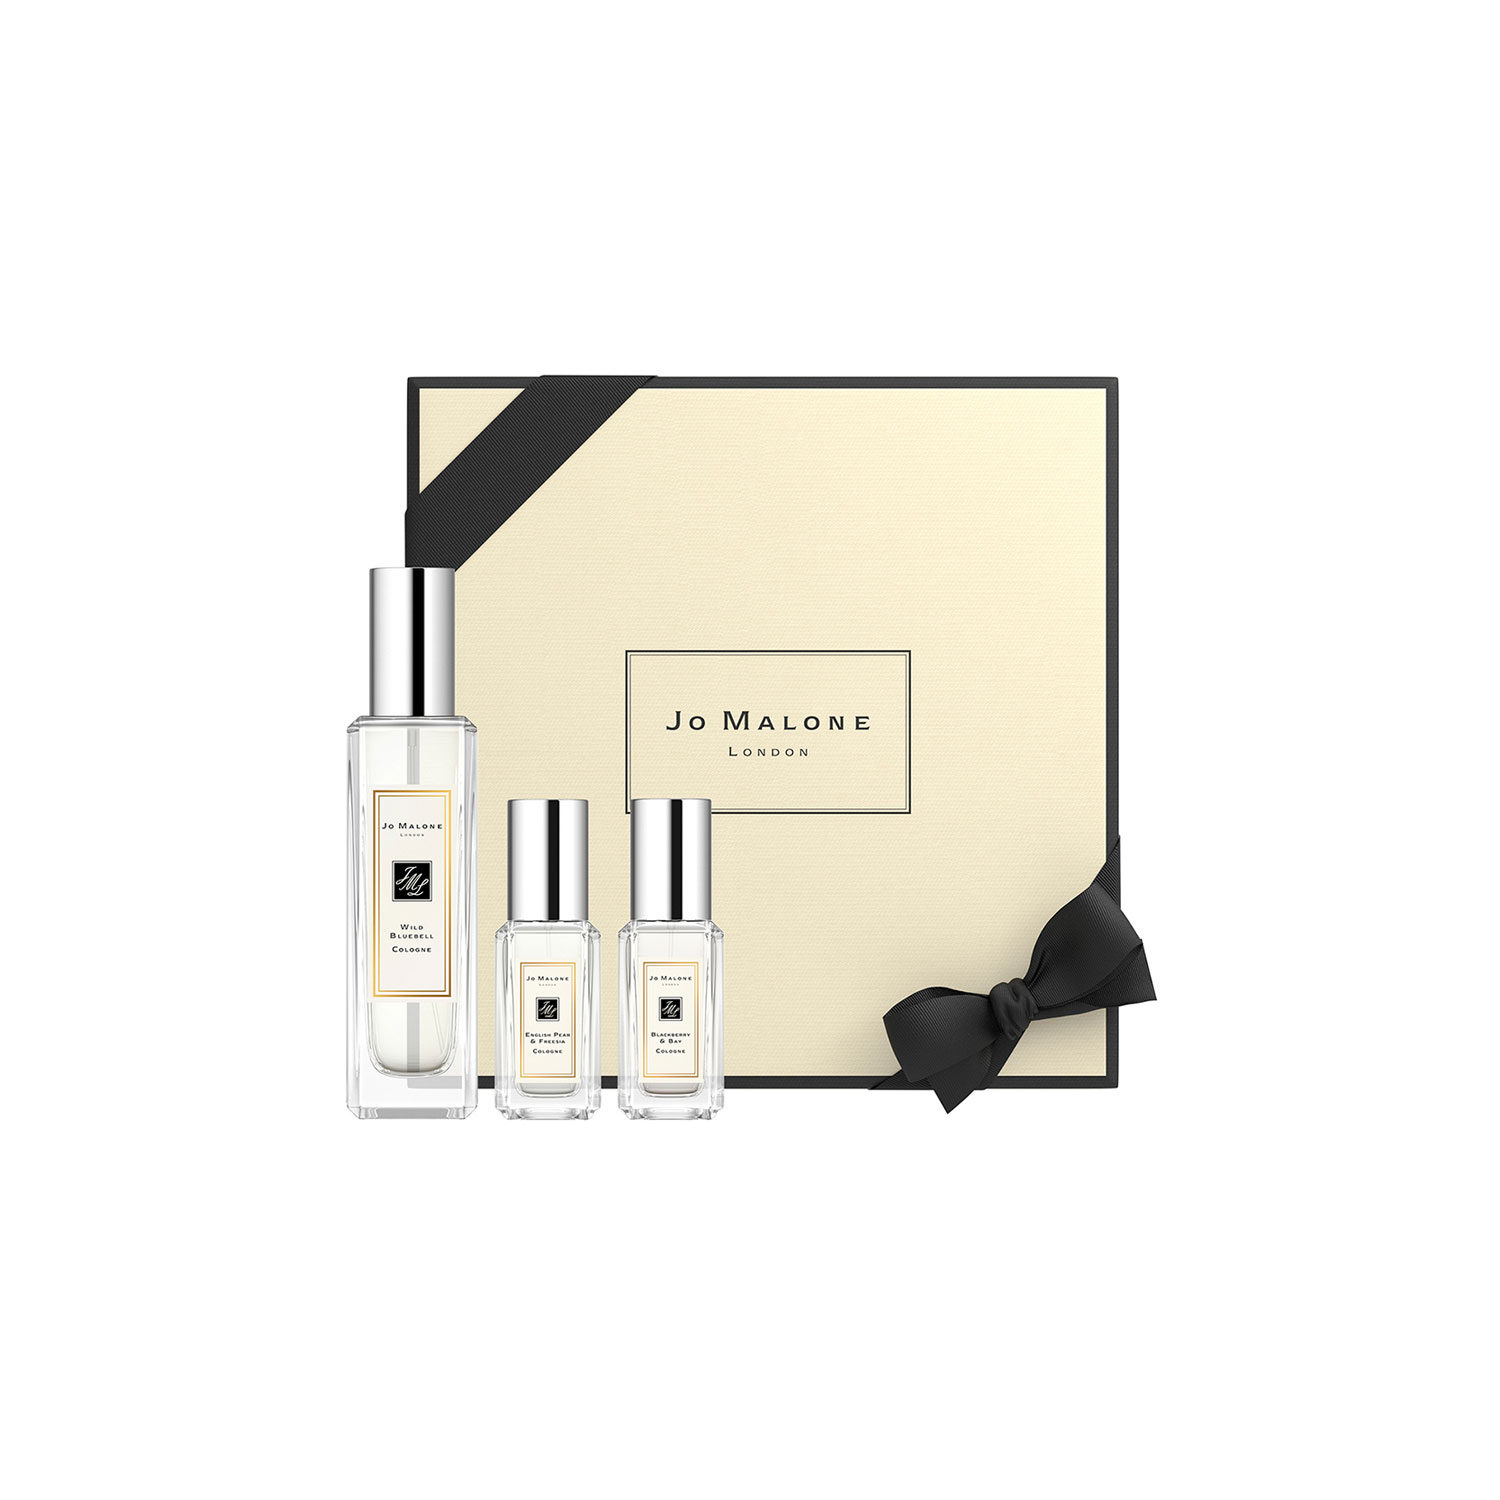 JO MALONE THE COLOGNE COLLECTION FEATURES THREE REFINED FRAGRANCES 